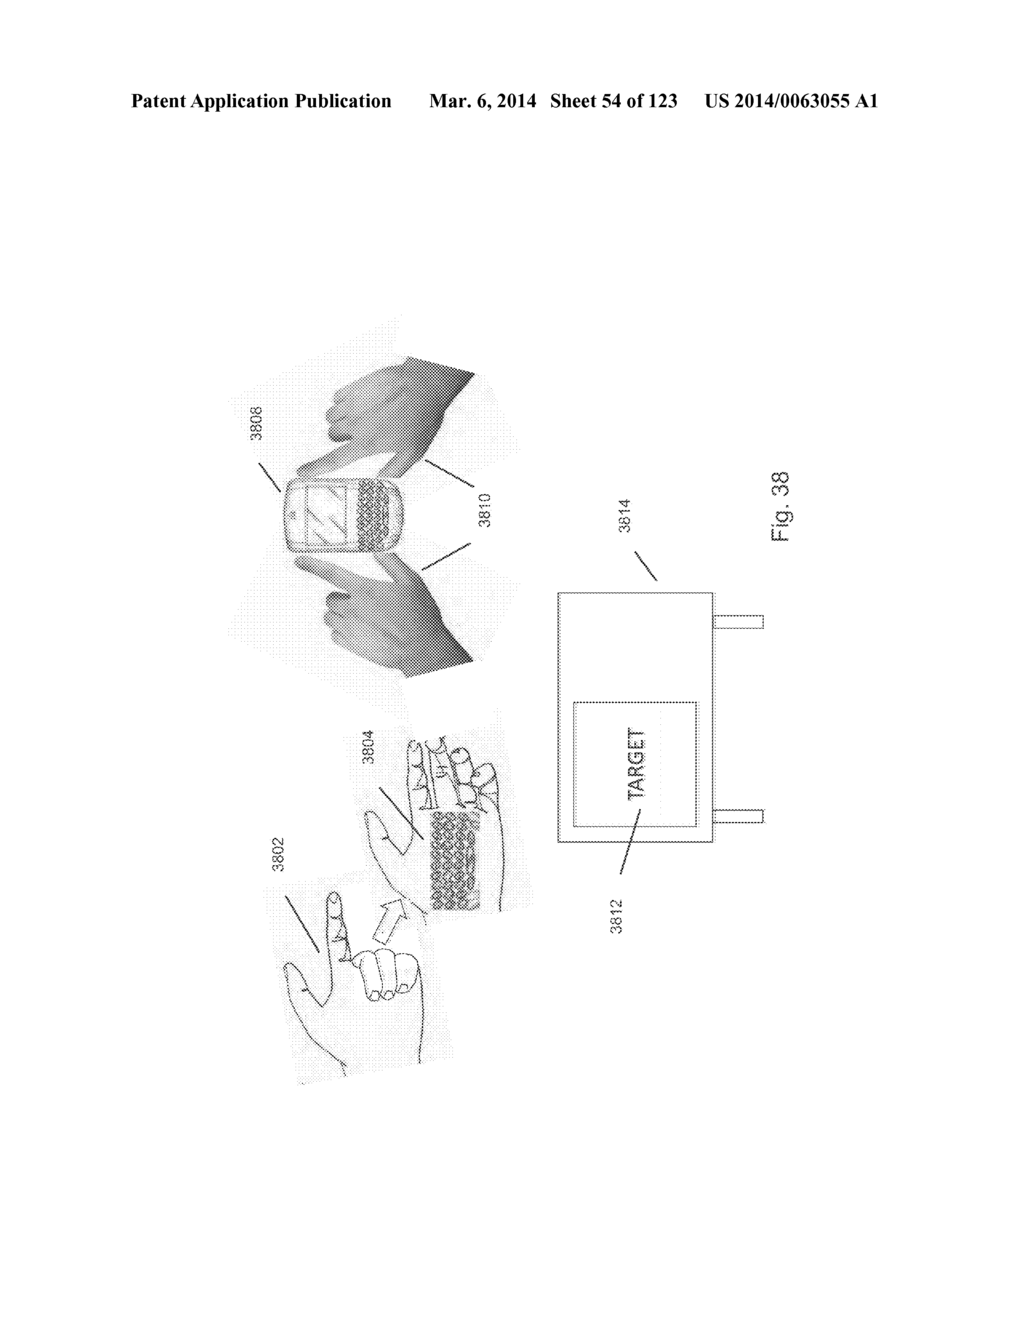 AR GLASSES SPECIFIC USER INTERFACE AND CONTROL INTERFACE BASED ON A     CONNECTED EXTERNAL DEVICE TYPE - diagram, schematic, and image 55